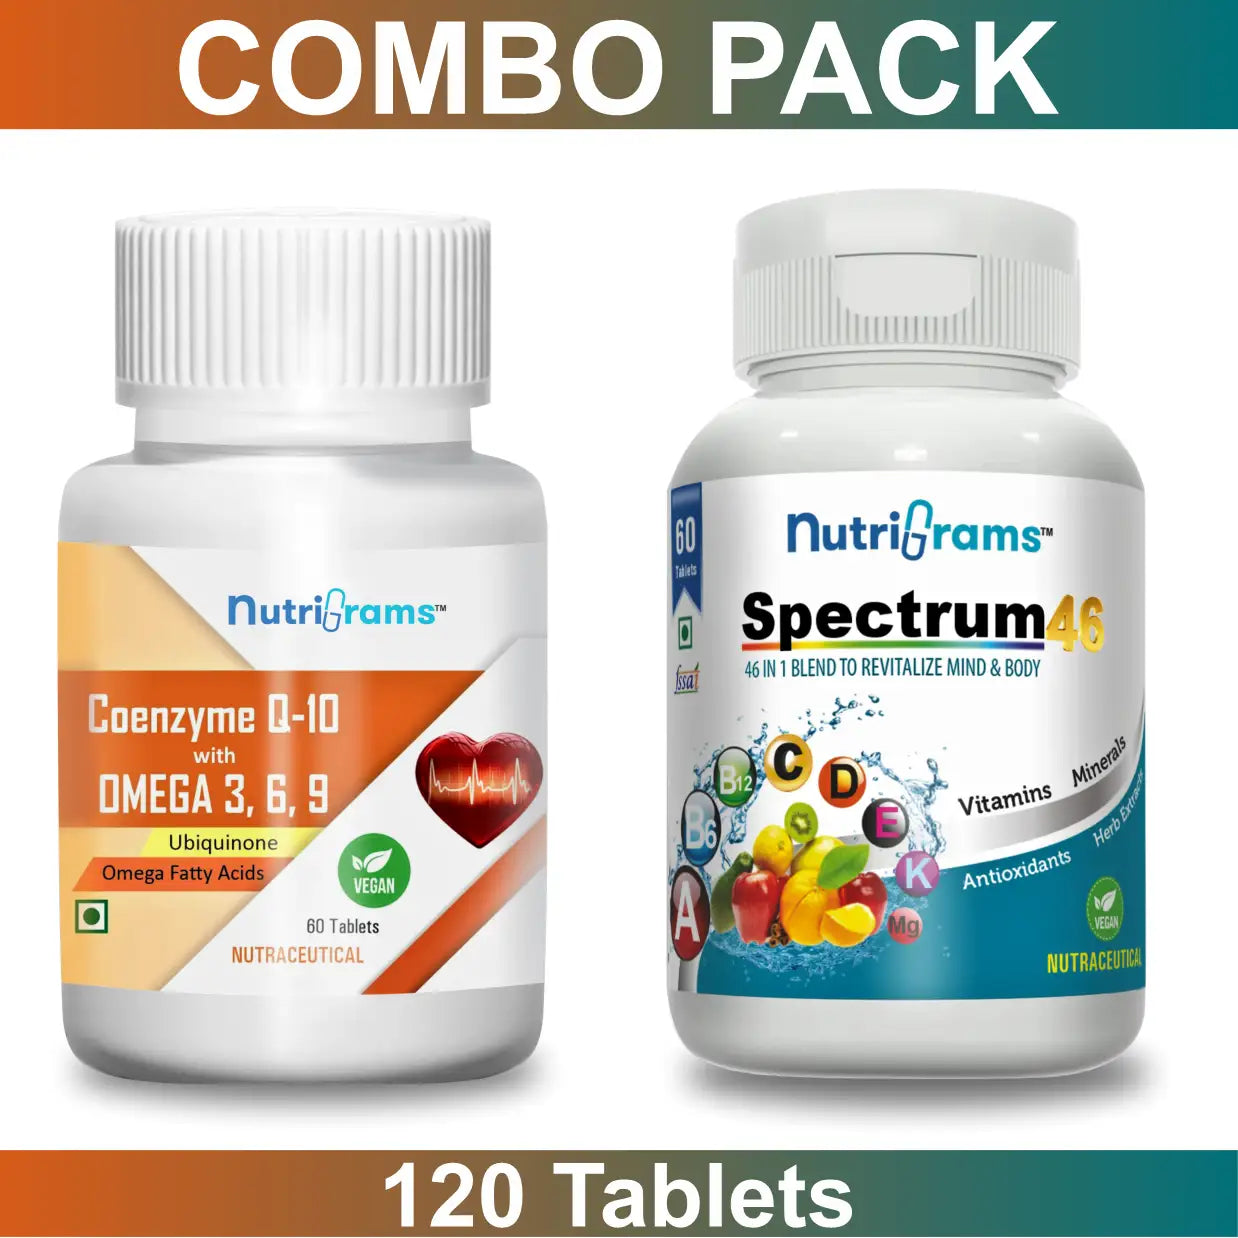 Coenzyme Q10 with Omega 369 + Spectrum46 Combo Pack